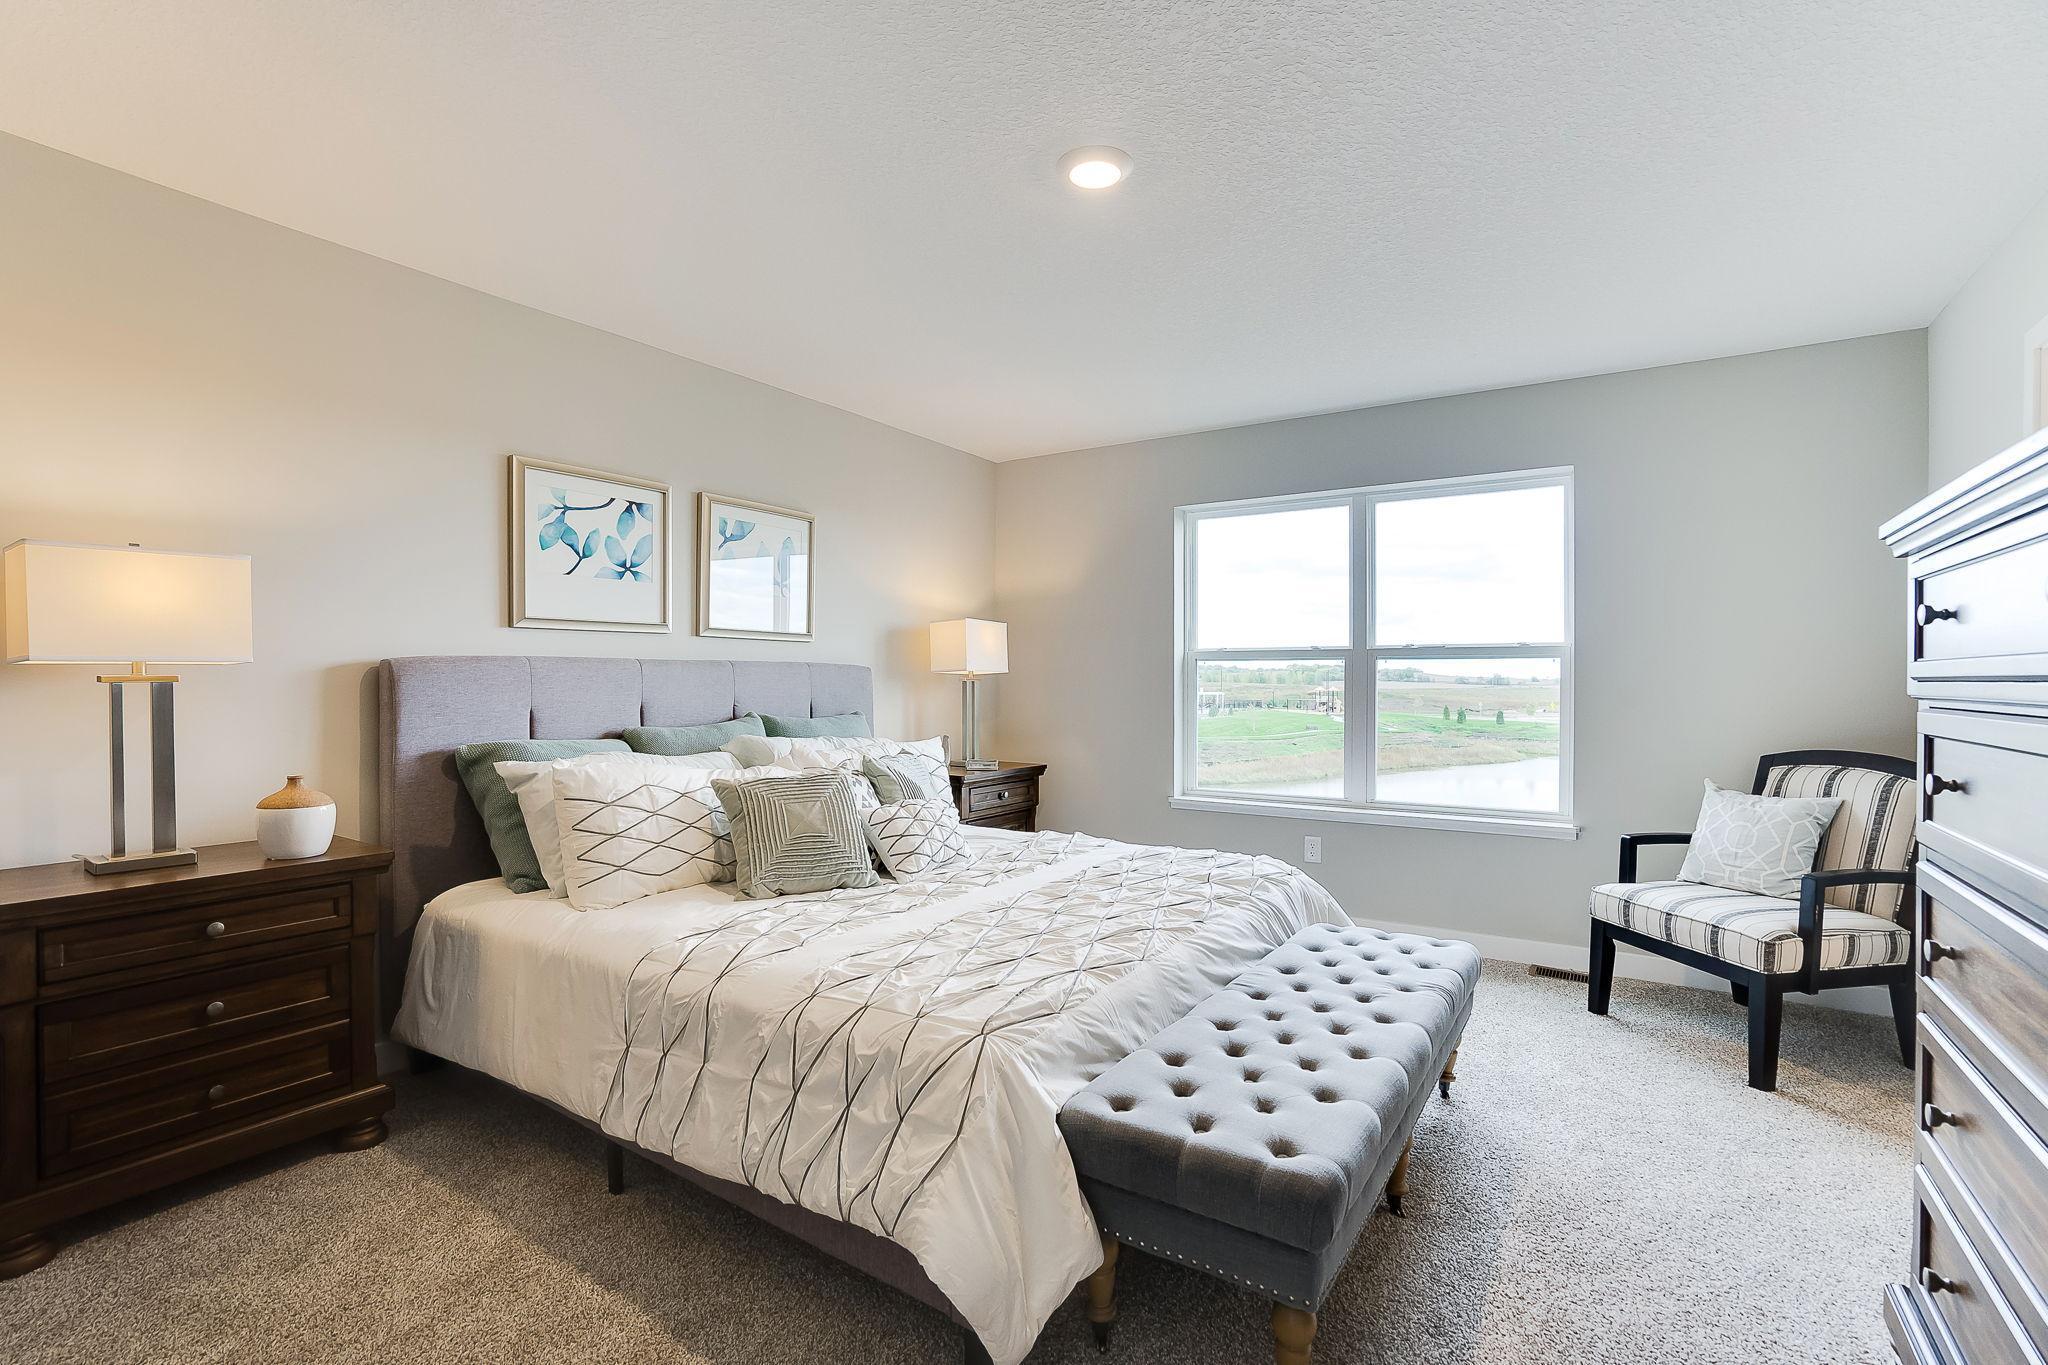 The primary suite has room for all your furniture and overlooks the backyard. (Model home, colors will vary)